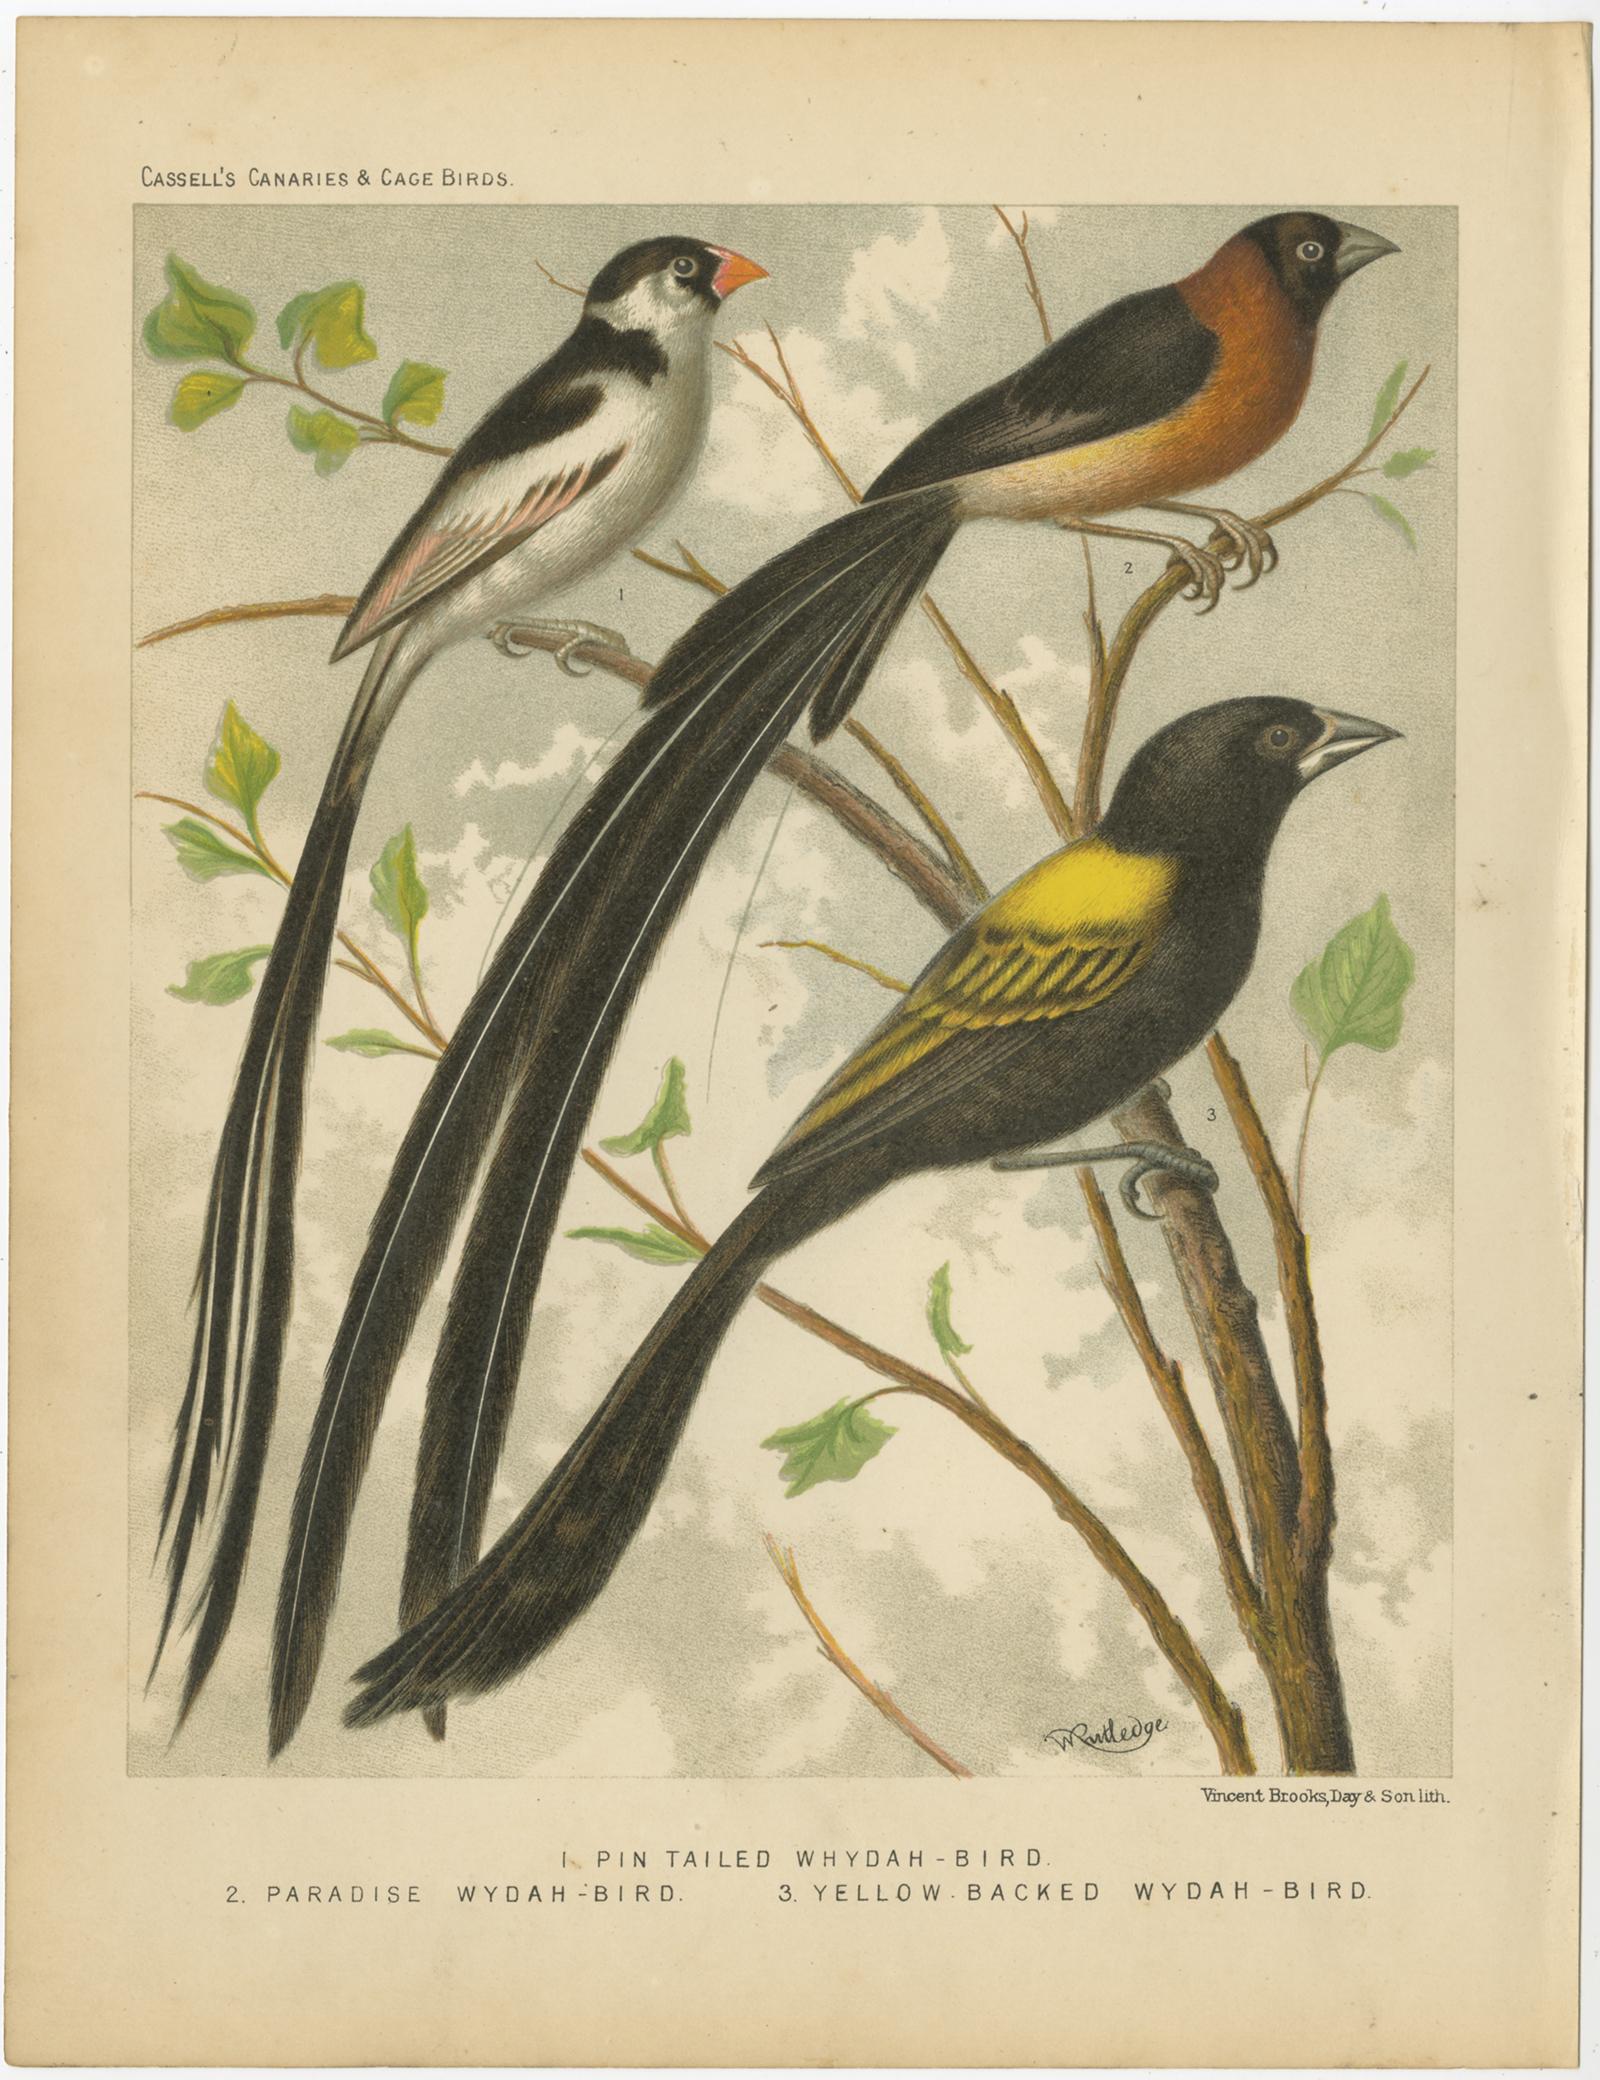 Antique bird print titled '1. Pin Tailed Whydah-Bird 2. Paradise Wydah-bird 3. Yellow backed Wydah-bird'. Old bird print depicting the Pin Tailed Whydah-Bird, Paradise Wydah-bird, Yellow Backed Wydah-bird. This print originates from: 'Illustrated